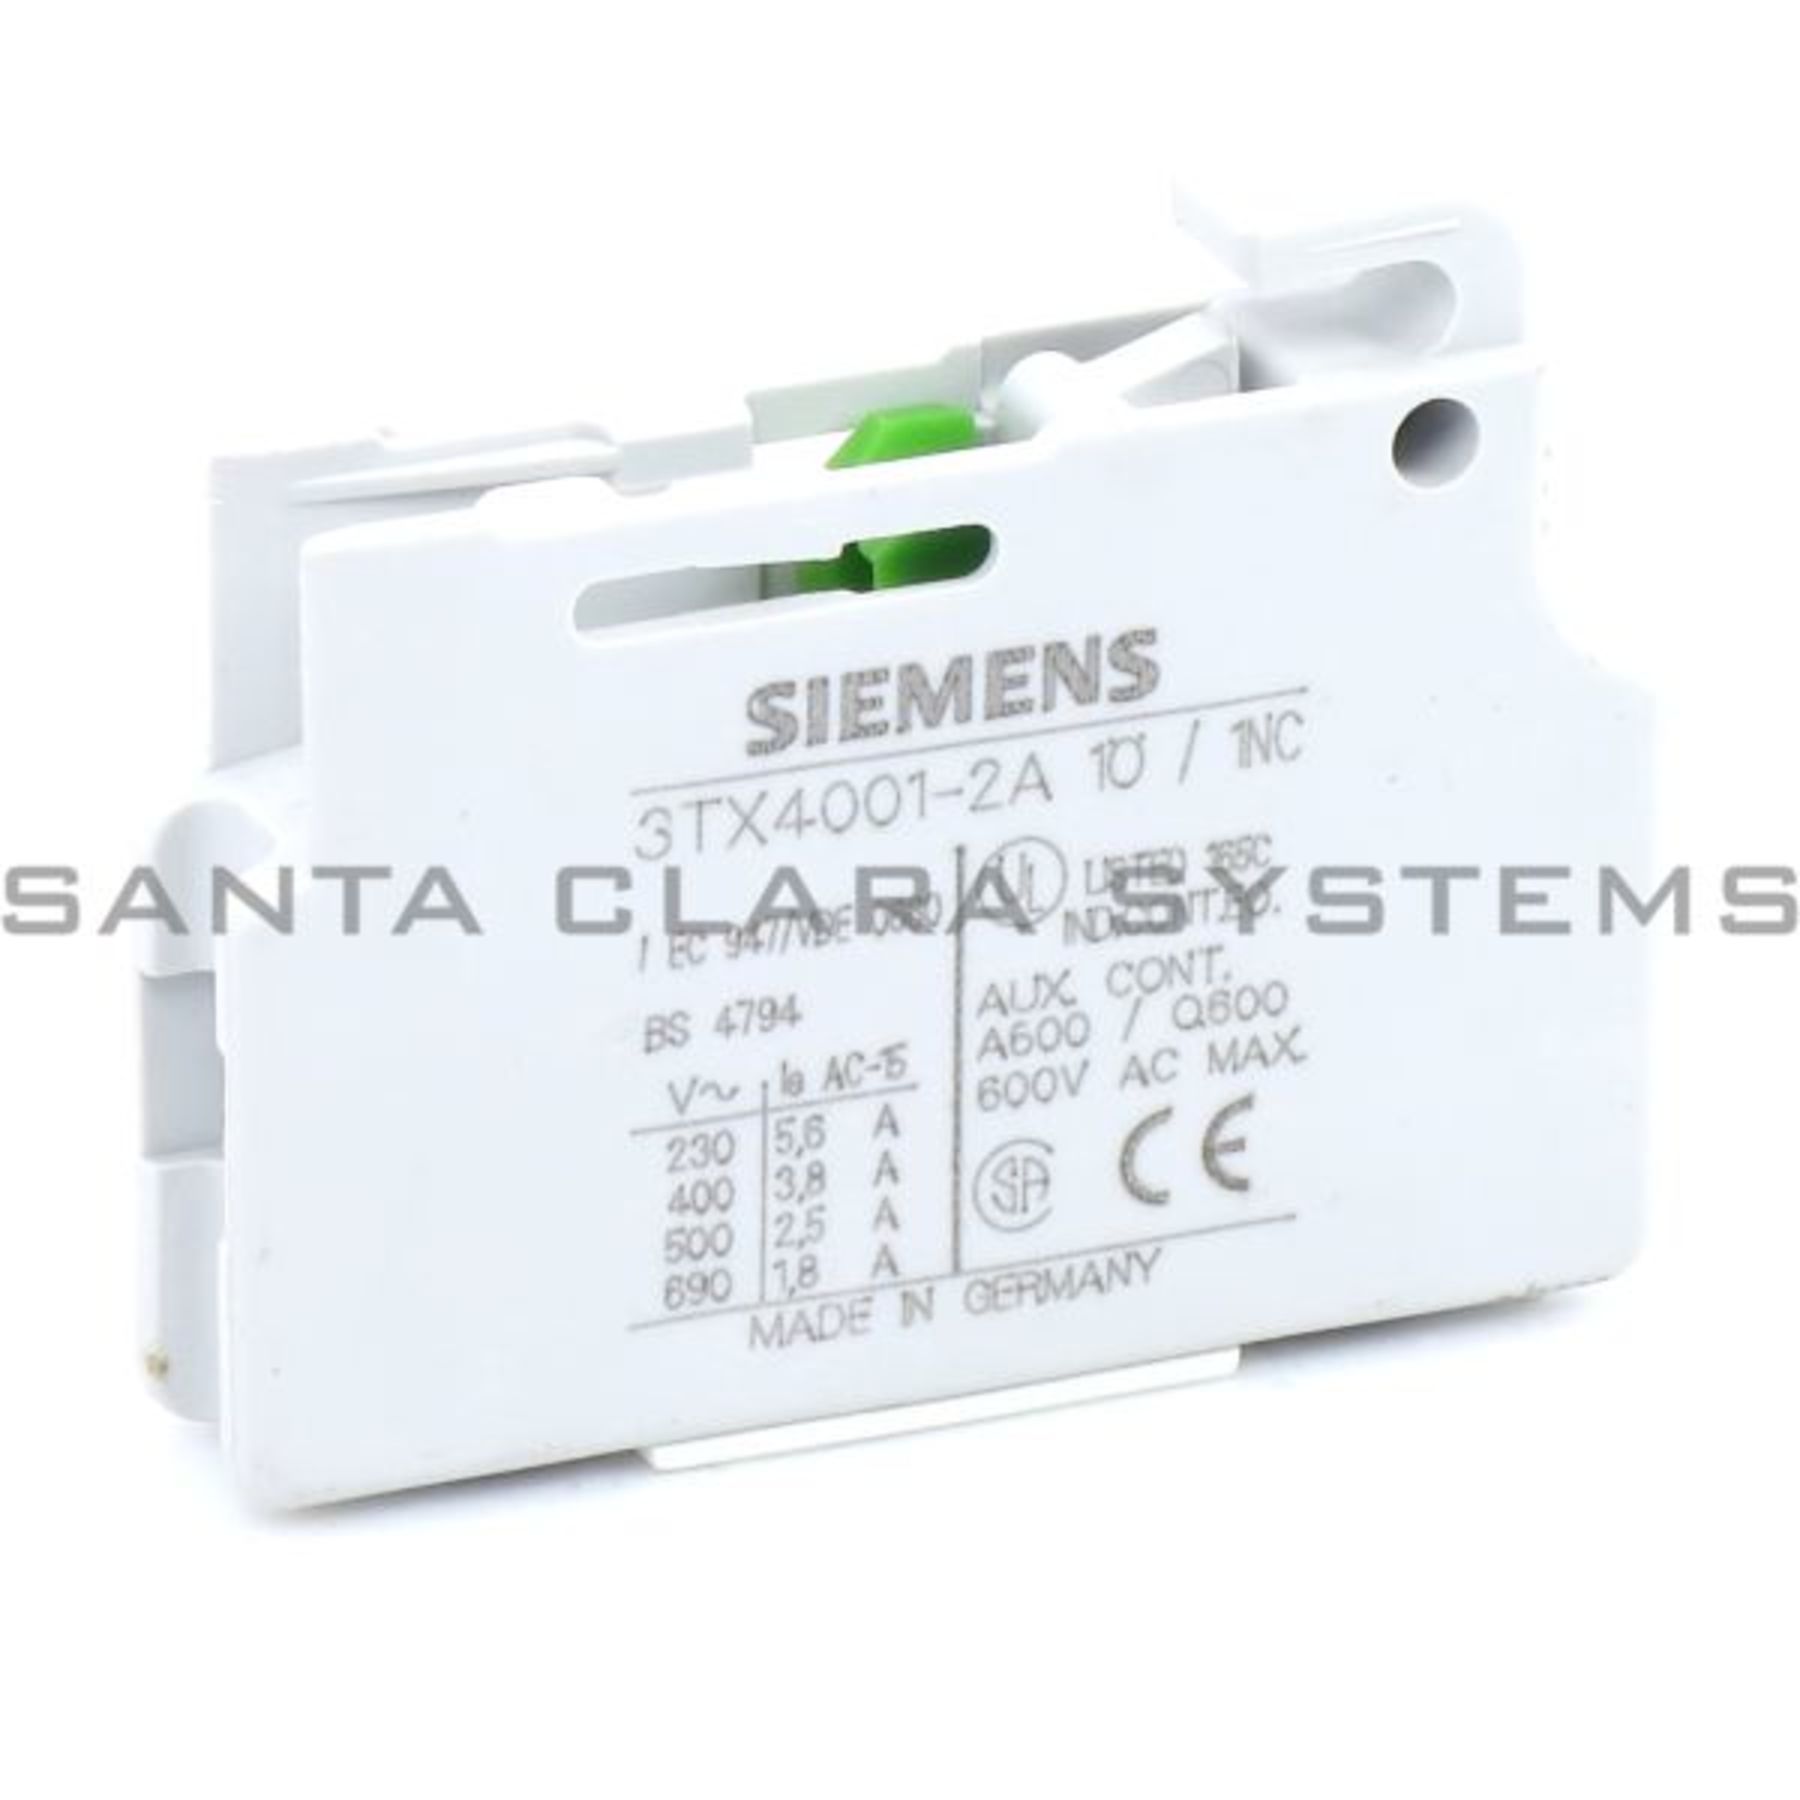 SIEMENS 3TX4001-2A AUXILIARY CONTACT BLOCK 